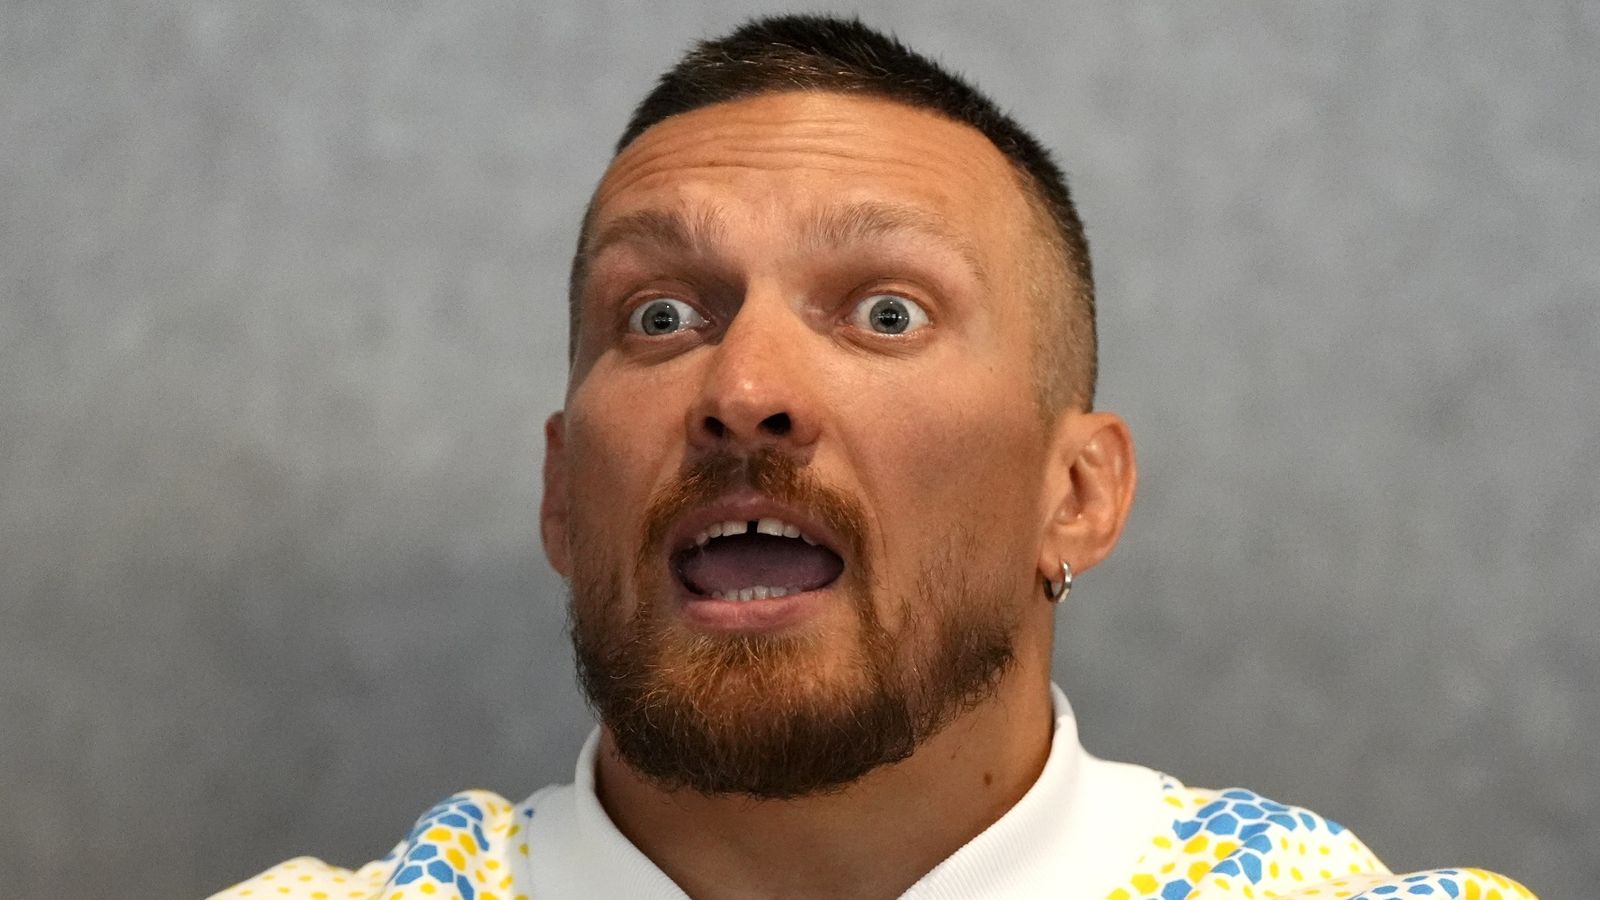 Fury vs Usyk: Oleksandr Usyk reveals how he called off his team to stop a brawl after Fury fracas